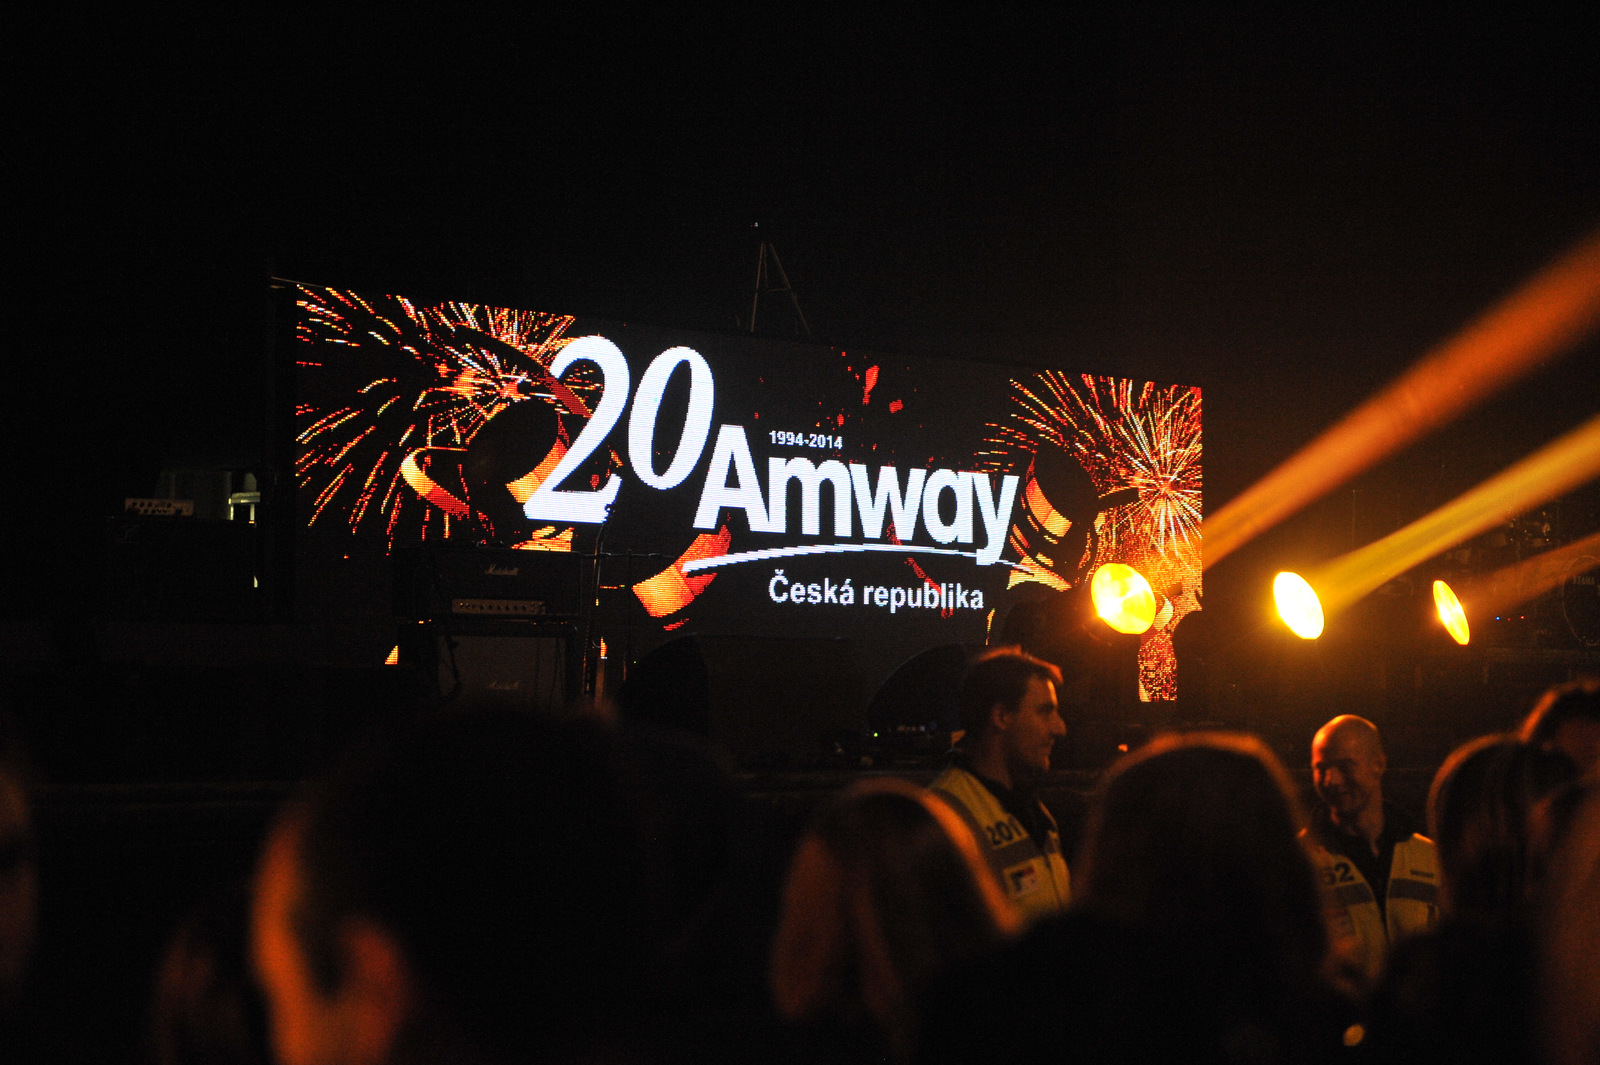 XS Party - 20 let Amway